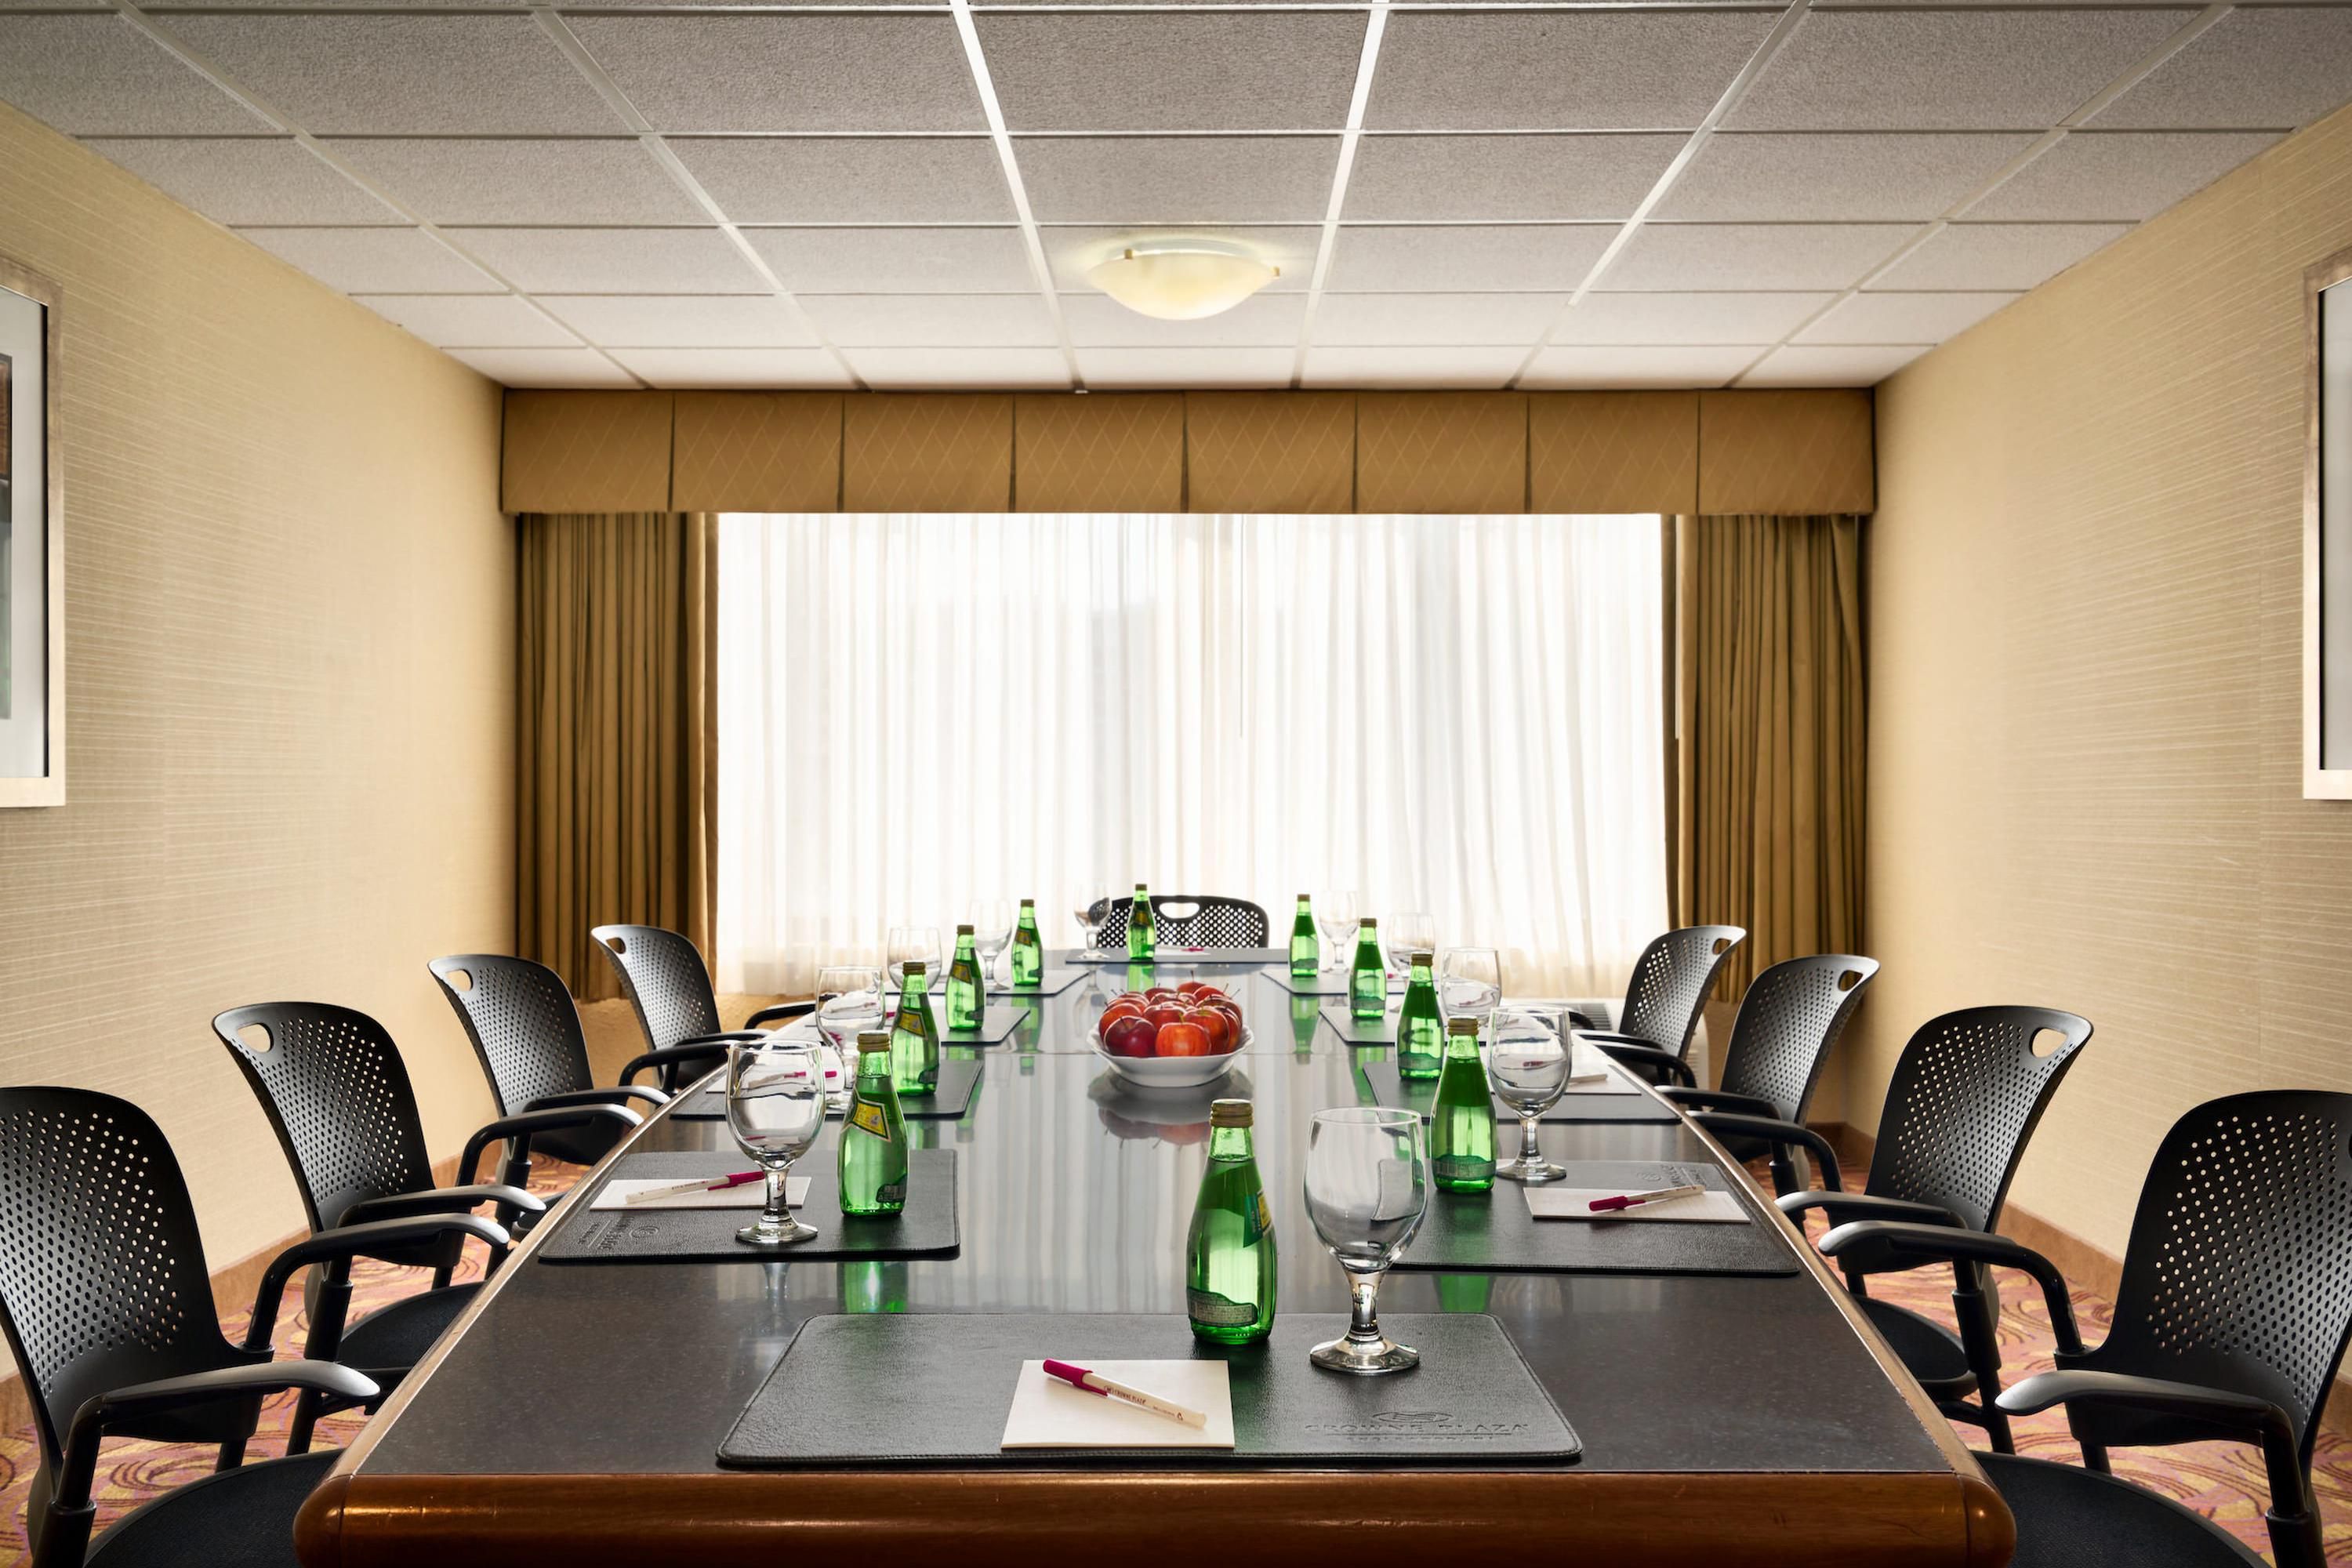 Host a board meeting in our Board Room ideal for small gatherings.